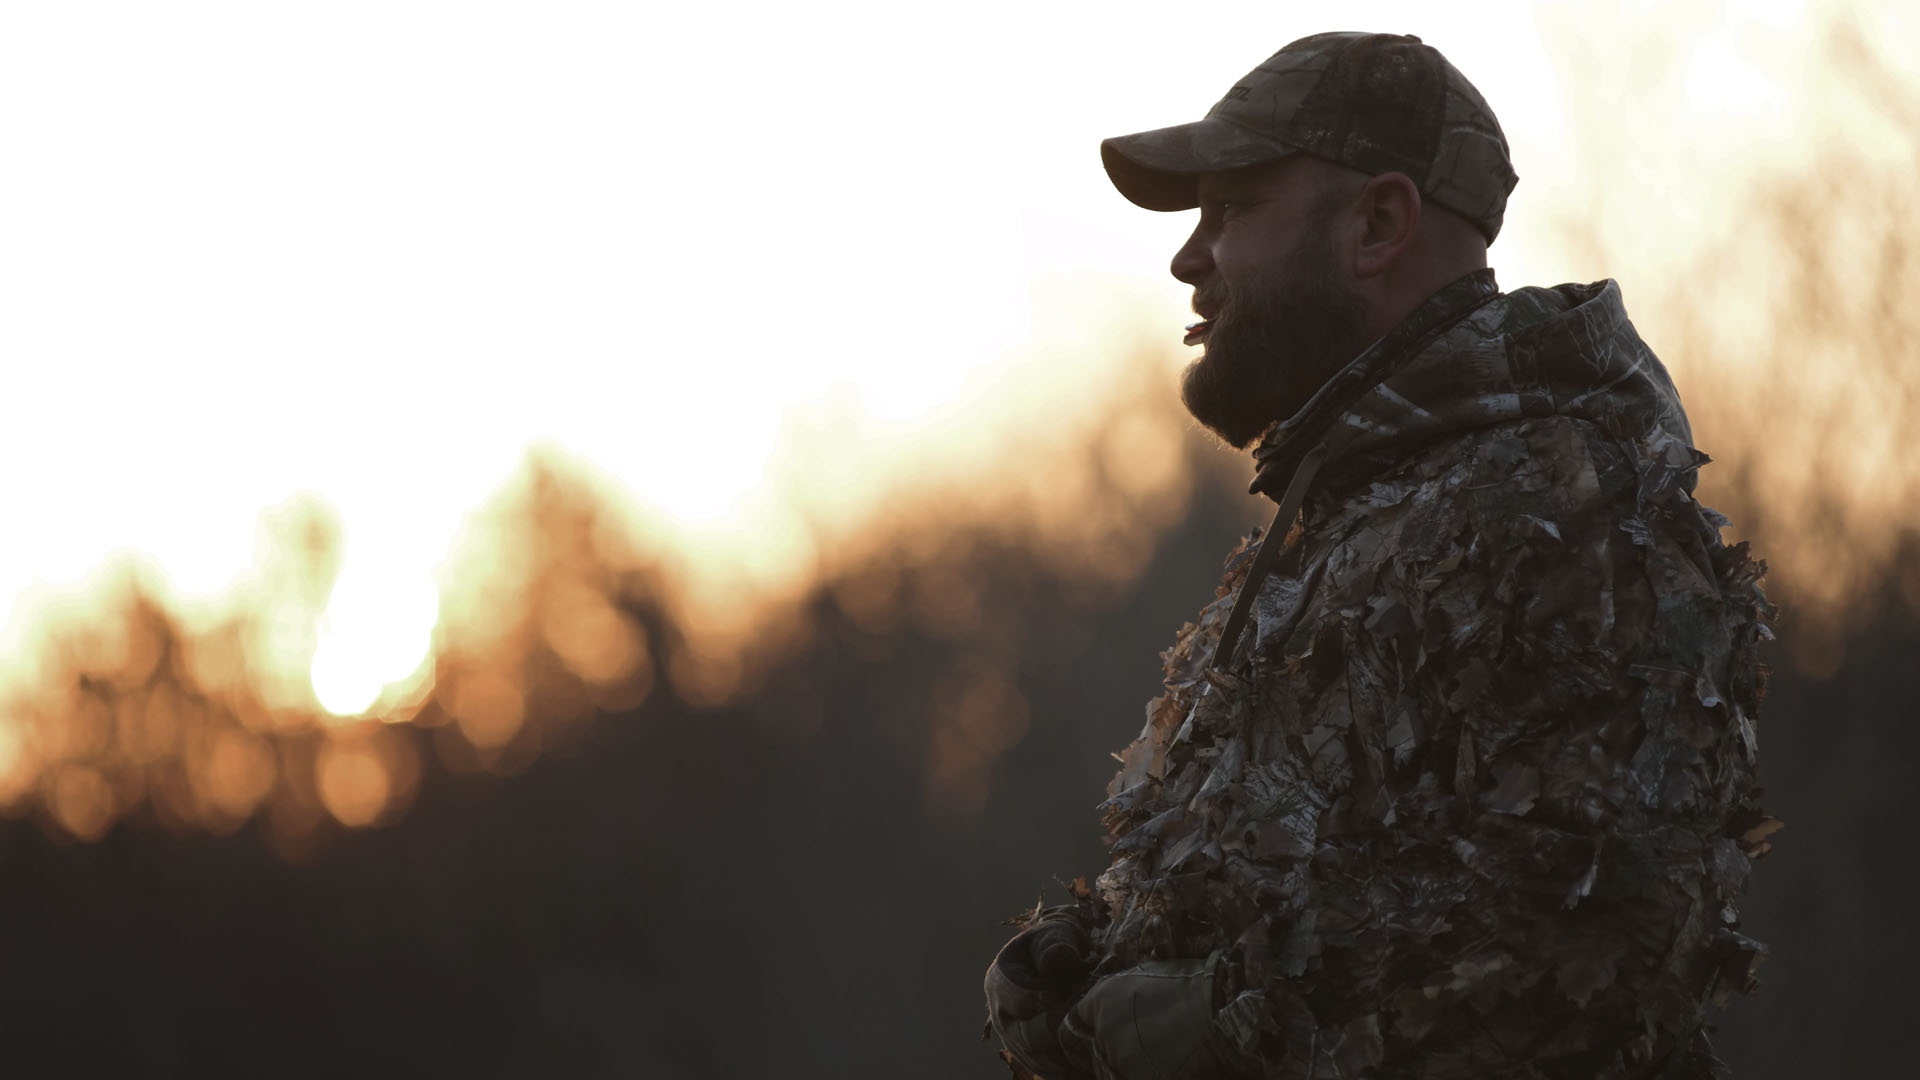 Paul Sawyer Feeds the Long Beard XR to Giant Gobblers